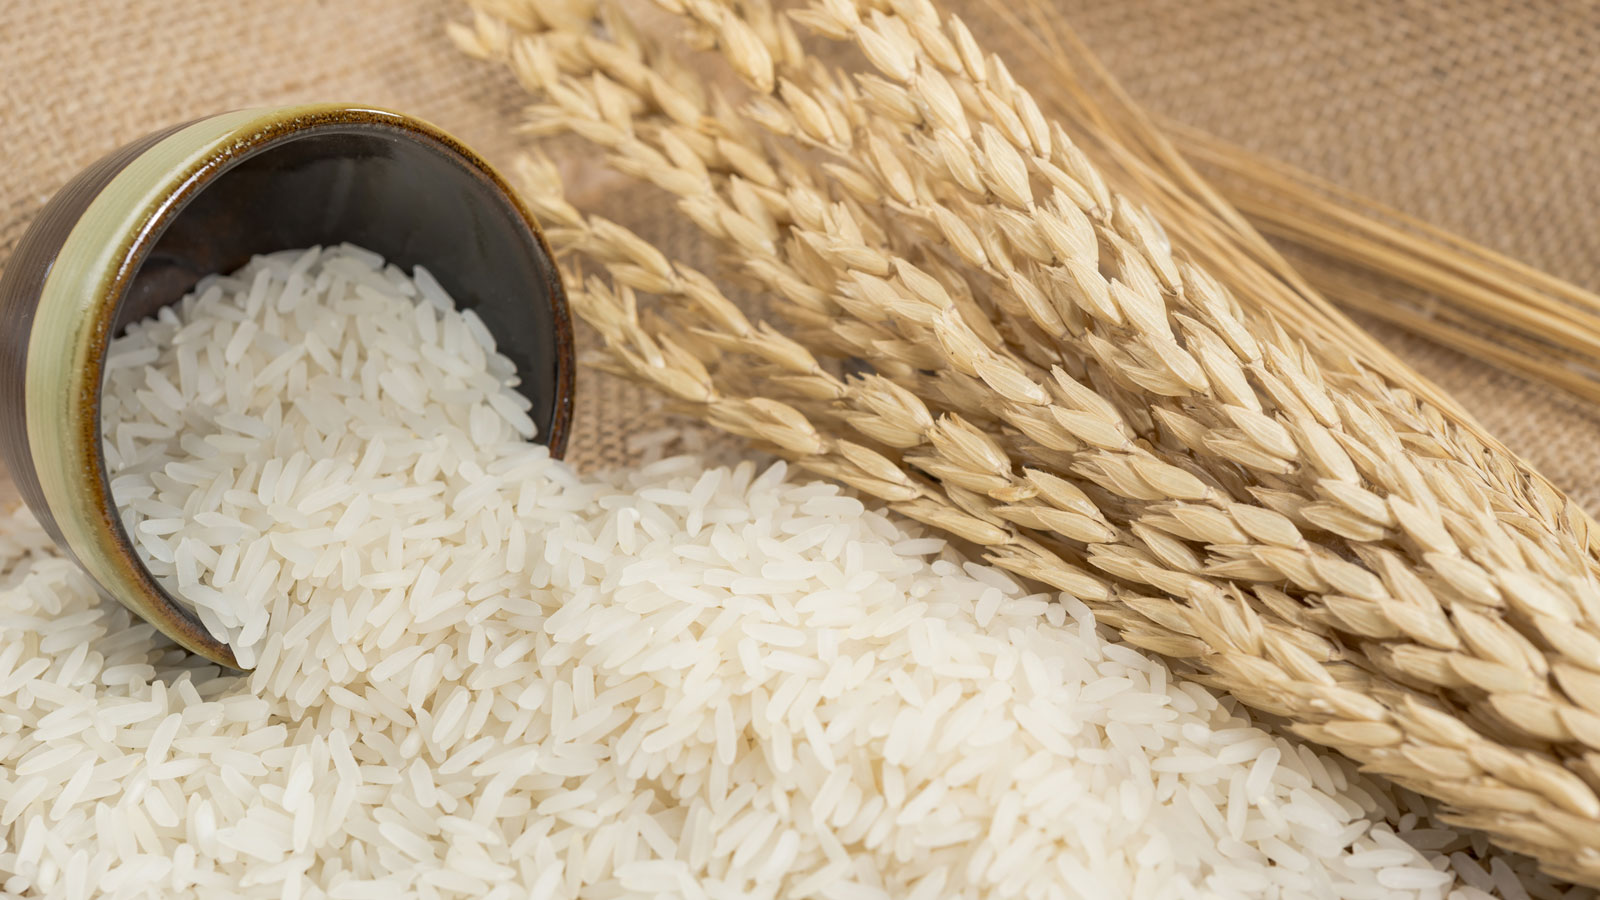 100 Rice Pictures  Download Free Images on Unsplash